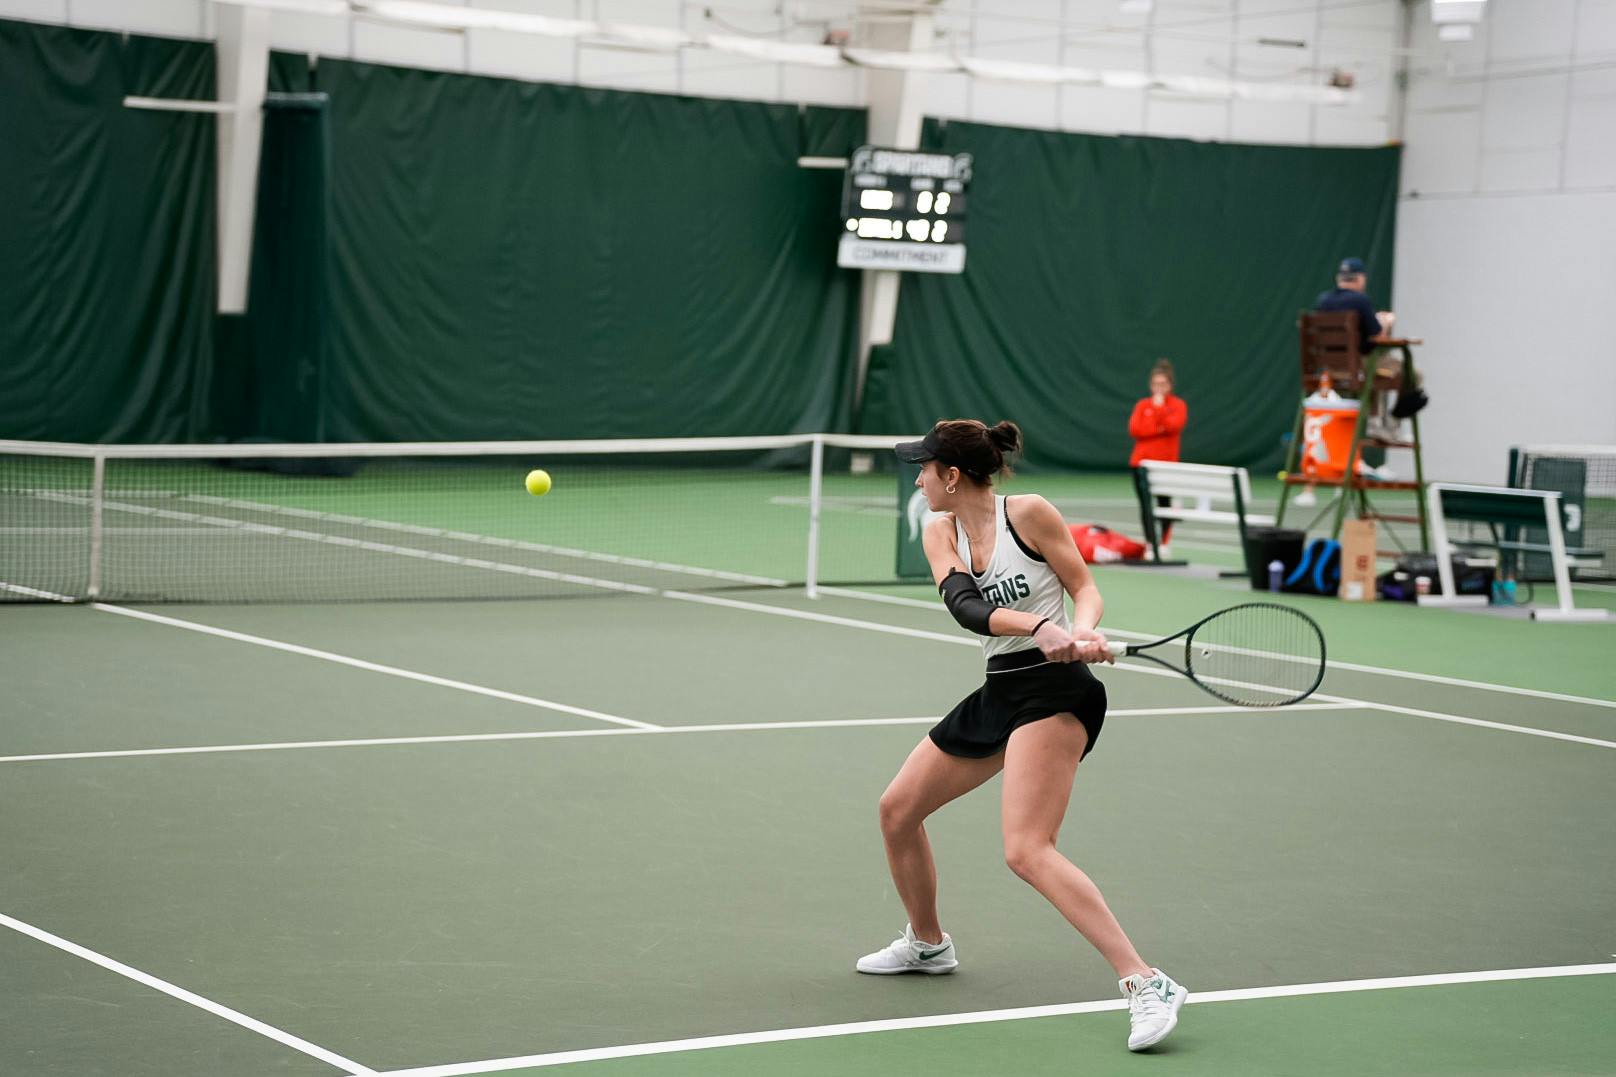 <p>Senior Maja Pietrowicz continues the rally against DePaul junior Lanka Antonijevic. Taken on January 30, 2022. Spartans won against<br/>DePaul University, with the final score of 5 - 2.<br/><br/><br/><br/></p>